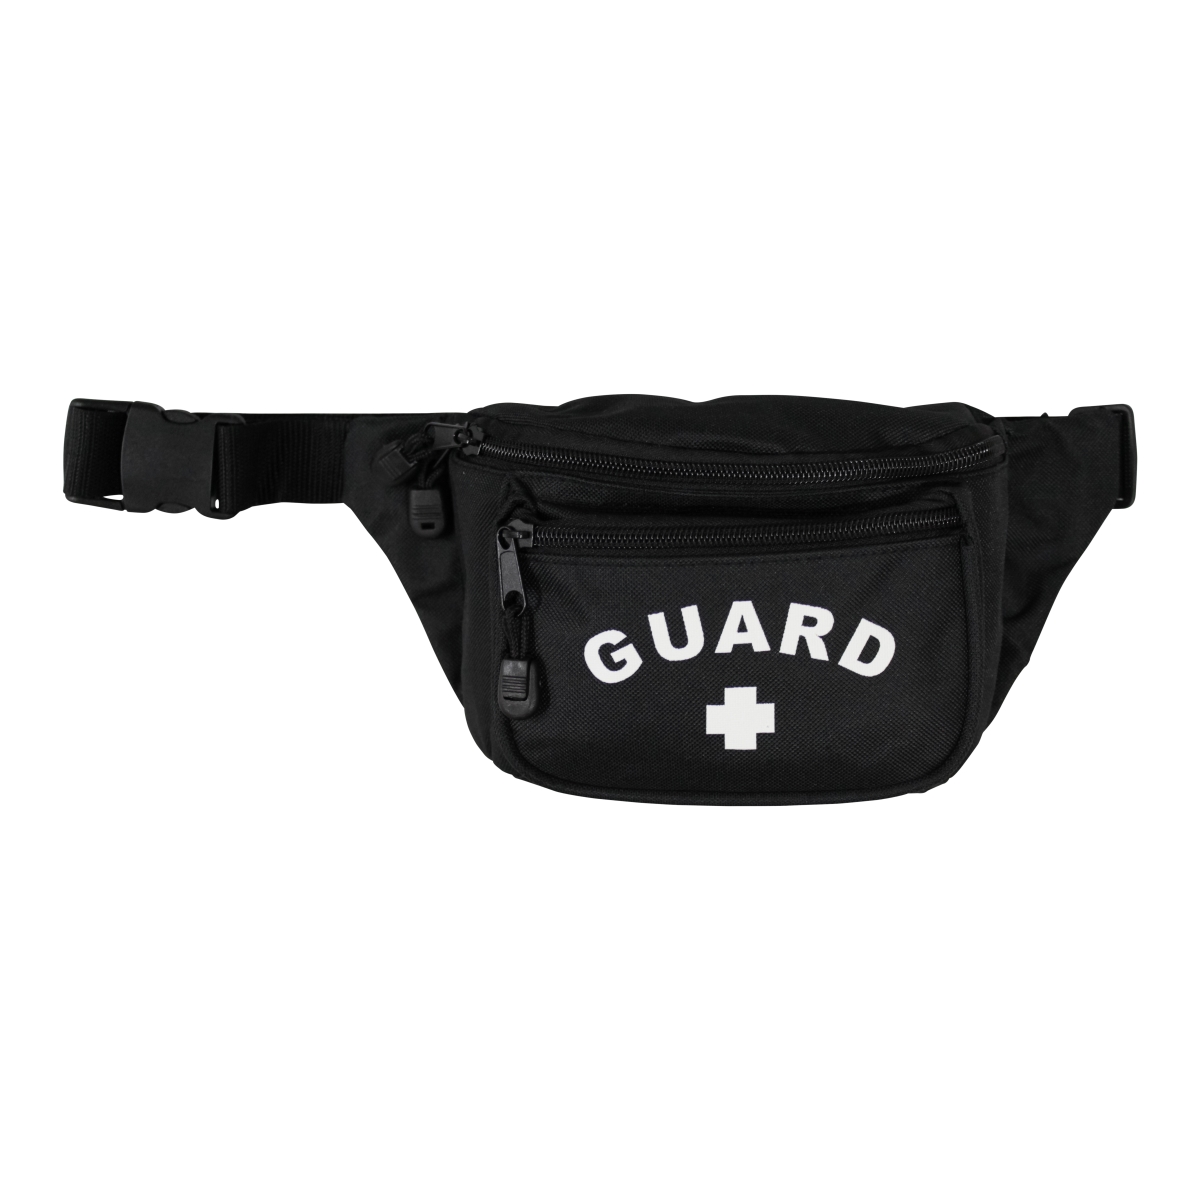 Picture of Kemp USA 10-103-BLK Hip Pack with Guard Logo, Black